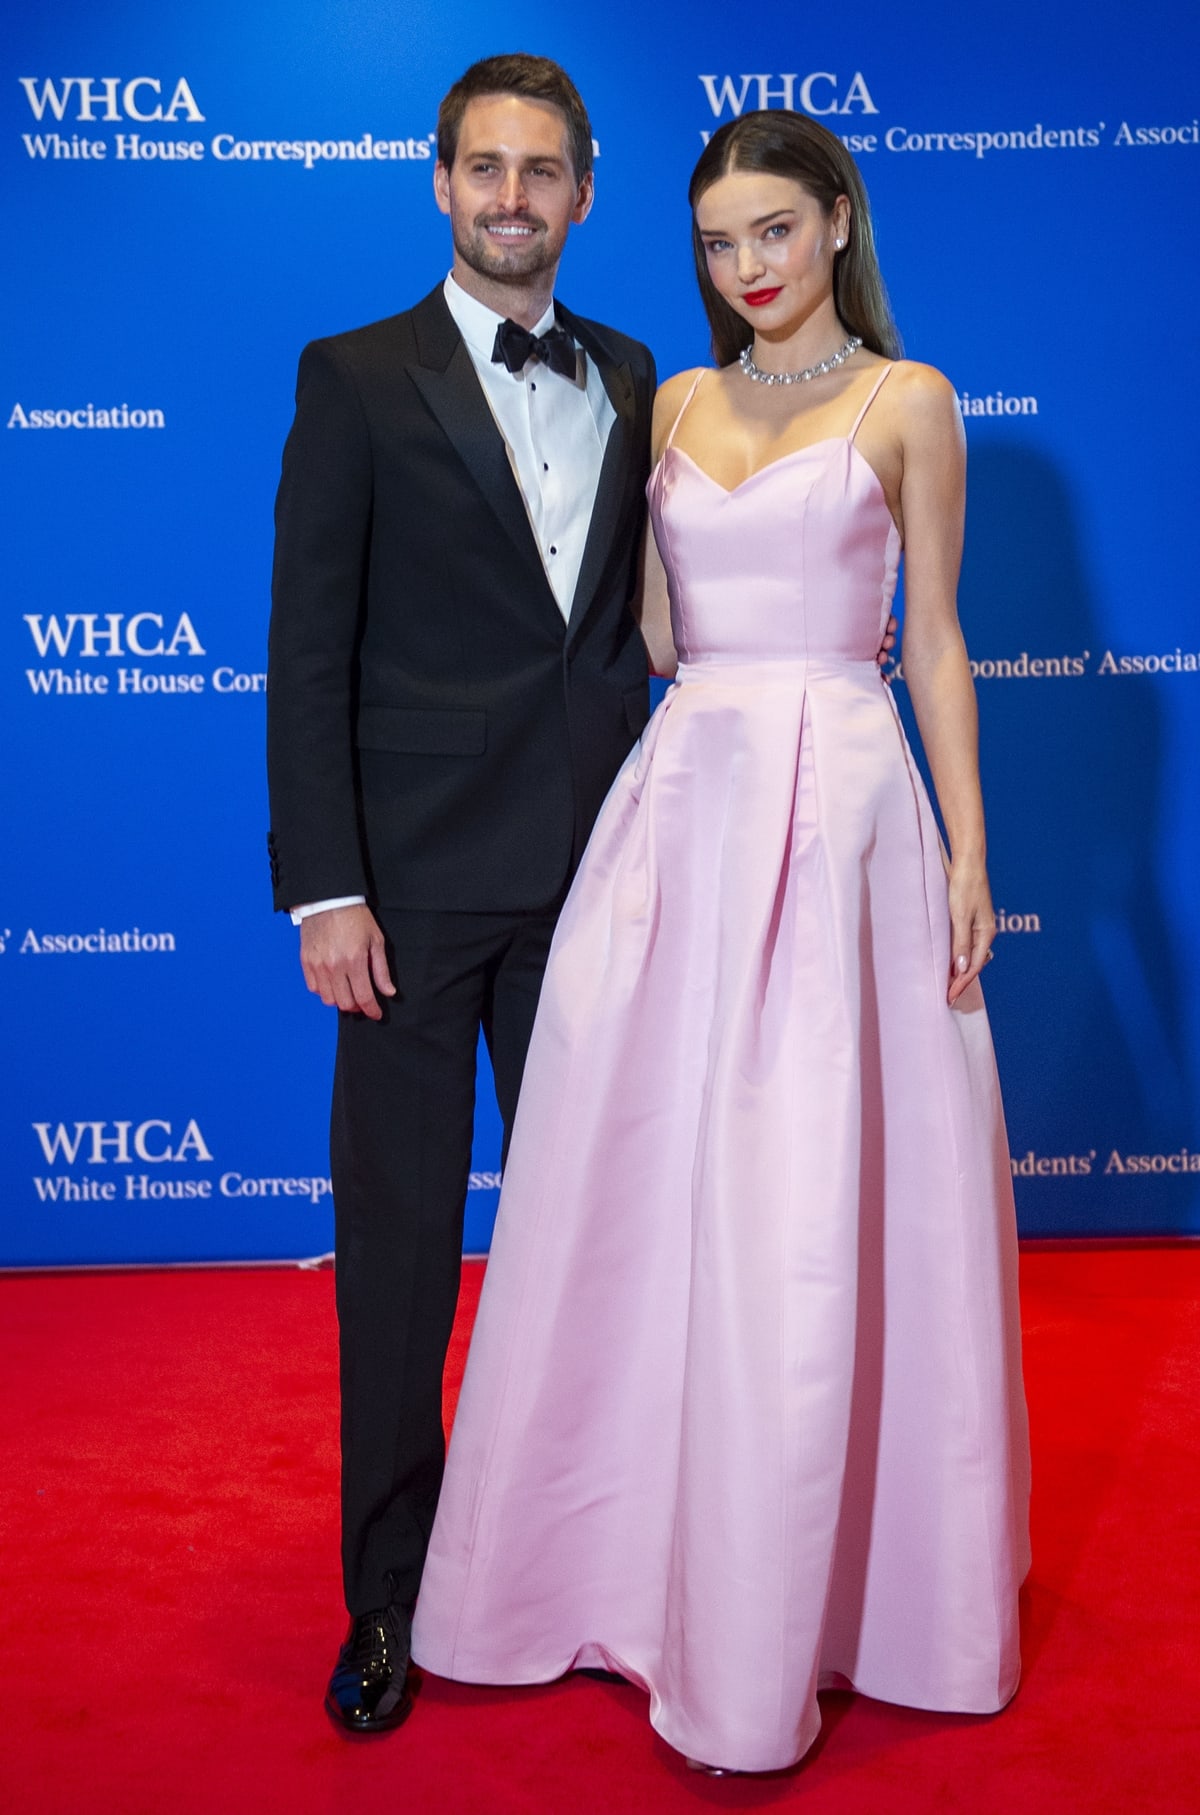 Evan Spiegel in a Saint Laurent tuxedo and his wife Miranda Kerr in a Sheila Frank dress at the 2022 White House Correspondents’ Association Dinner